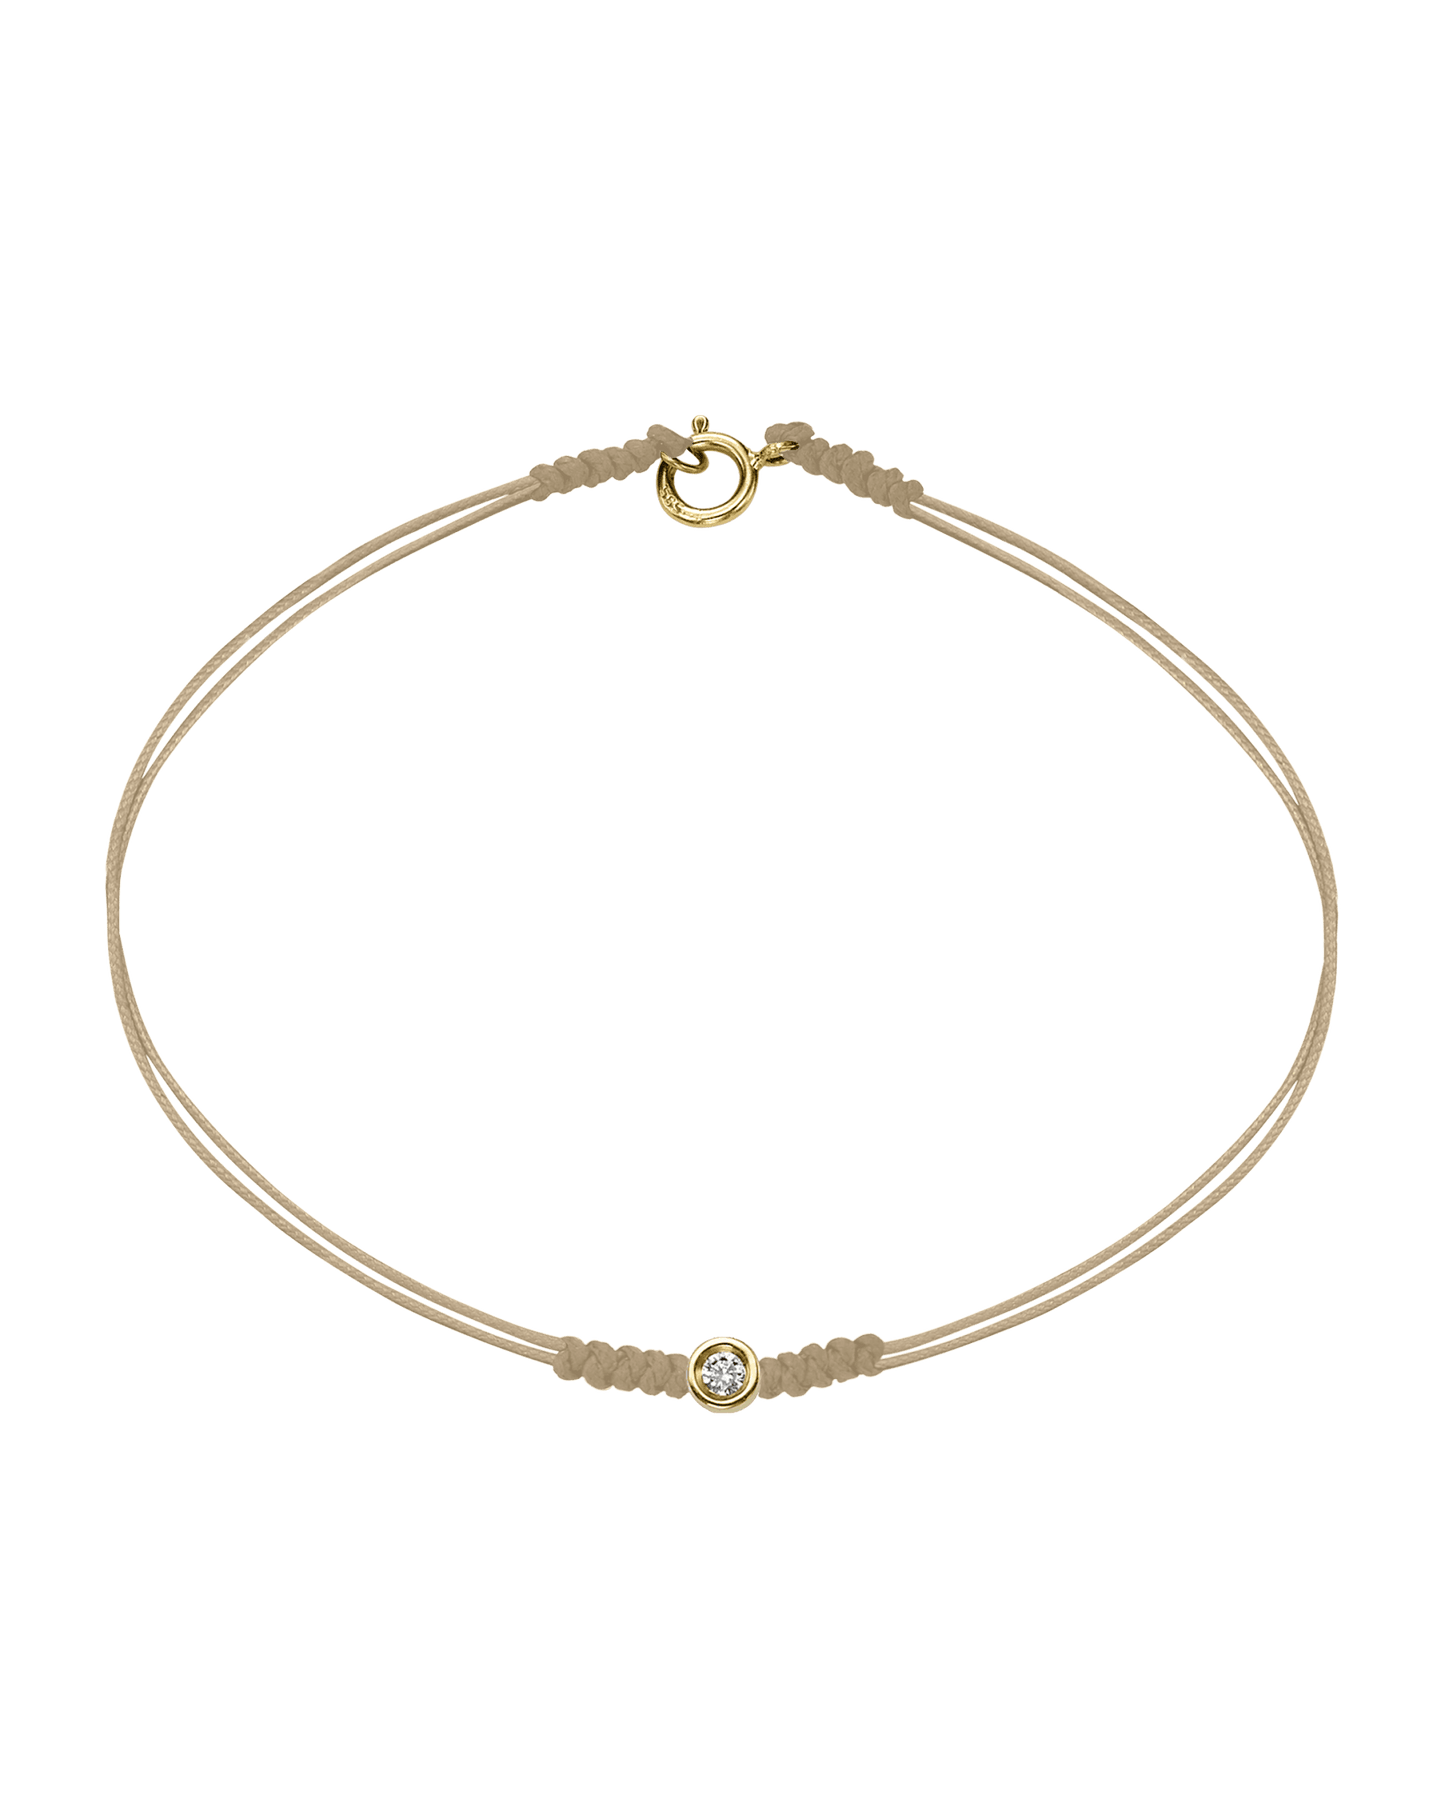 The Classic String of Love with clasp - 14K Yellow Gold Bracelets 14K Solid Gold Beige Small: 0.03ct Small - 6 Inches (15.5cm)